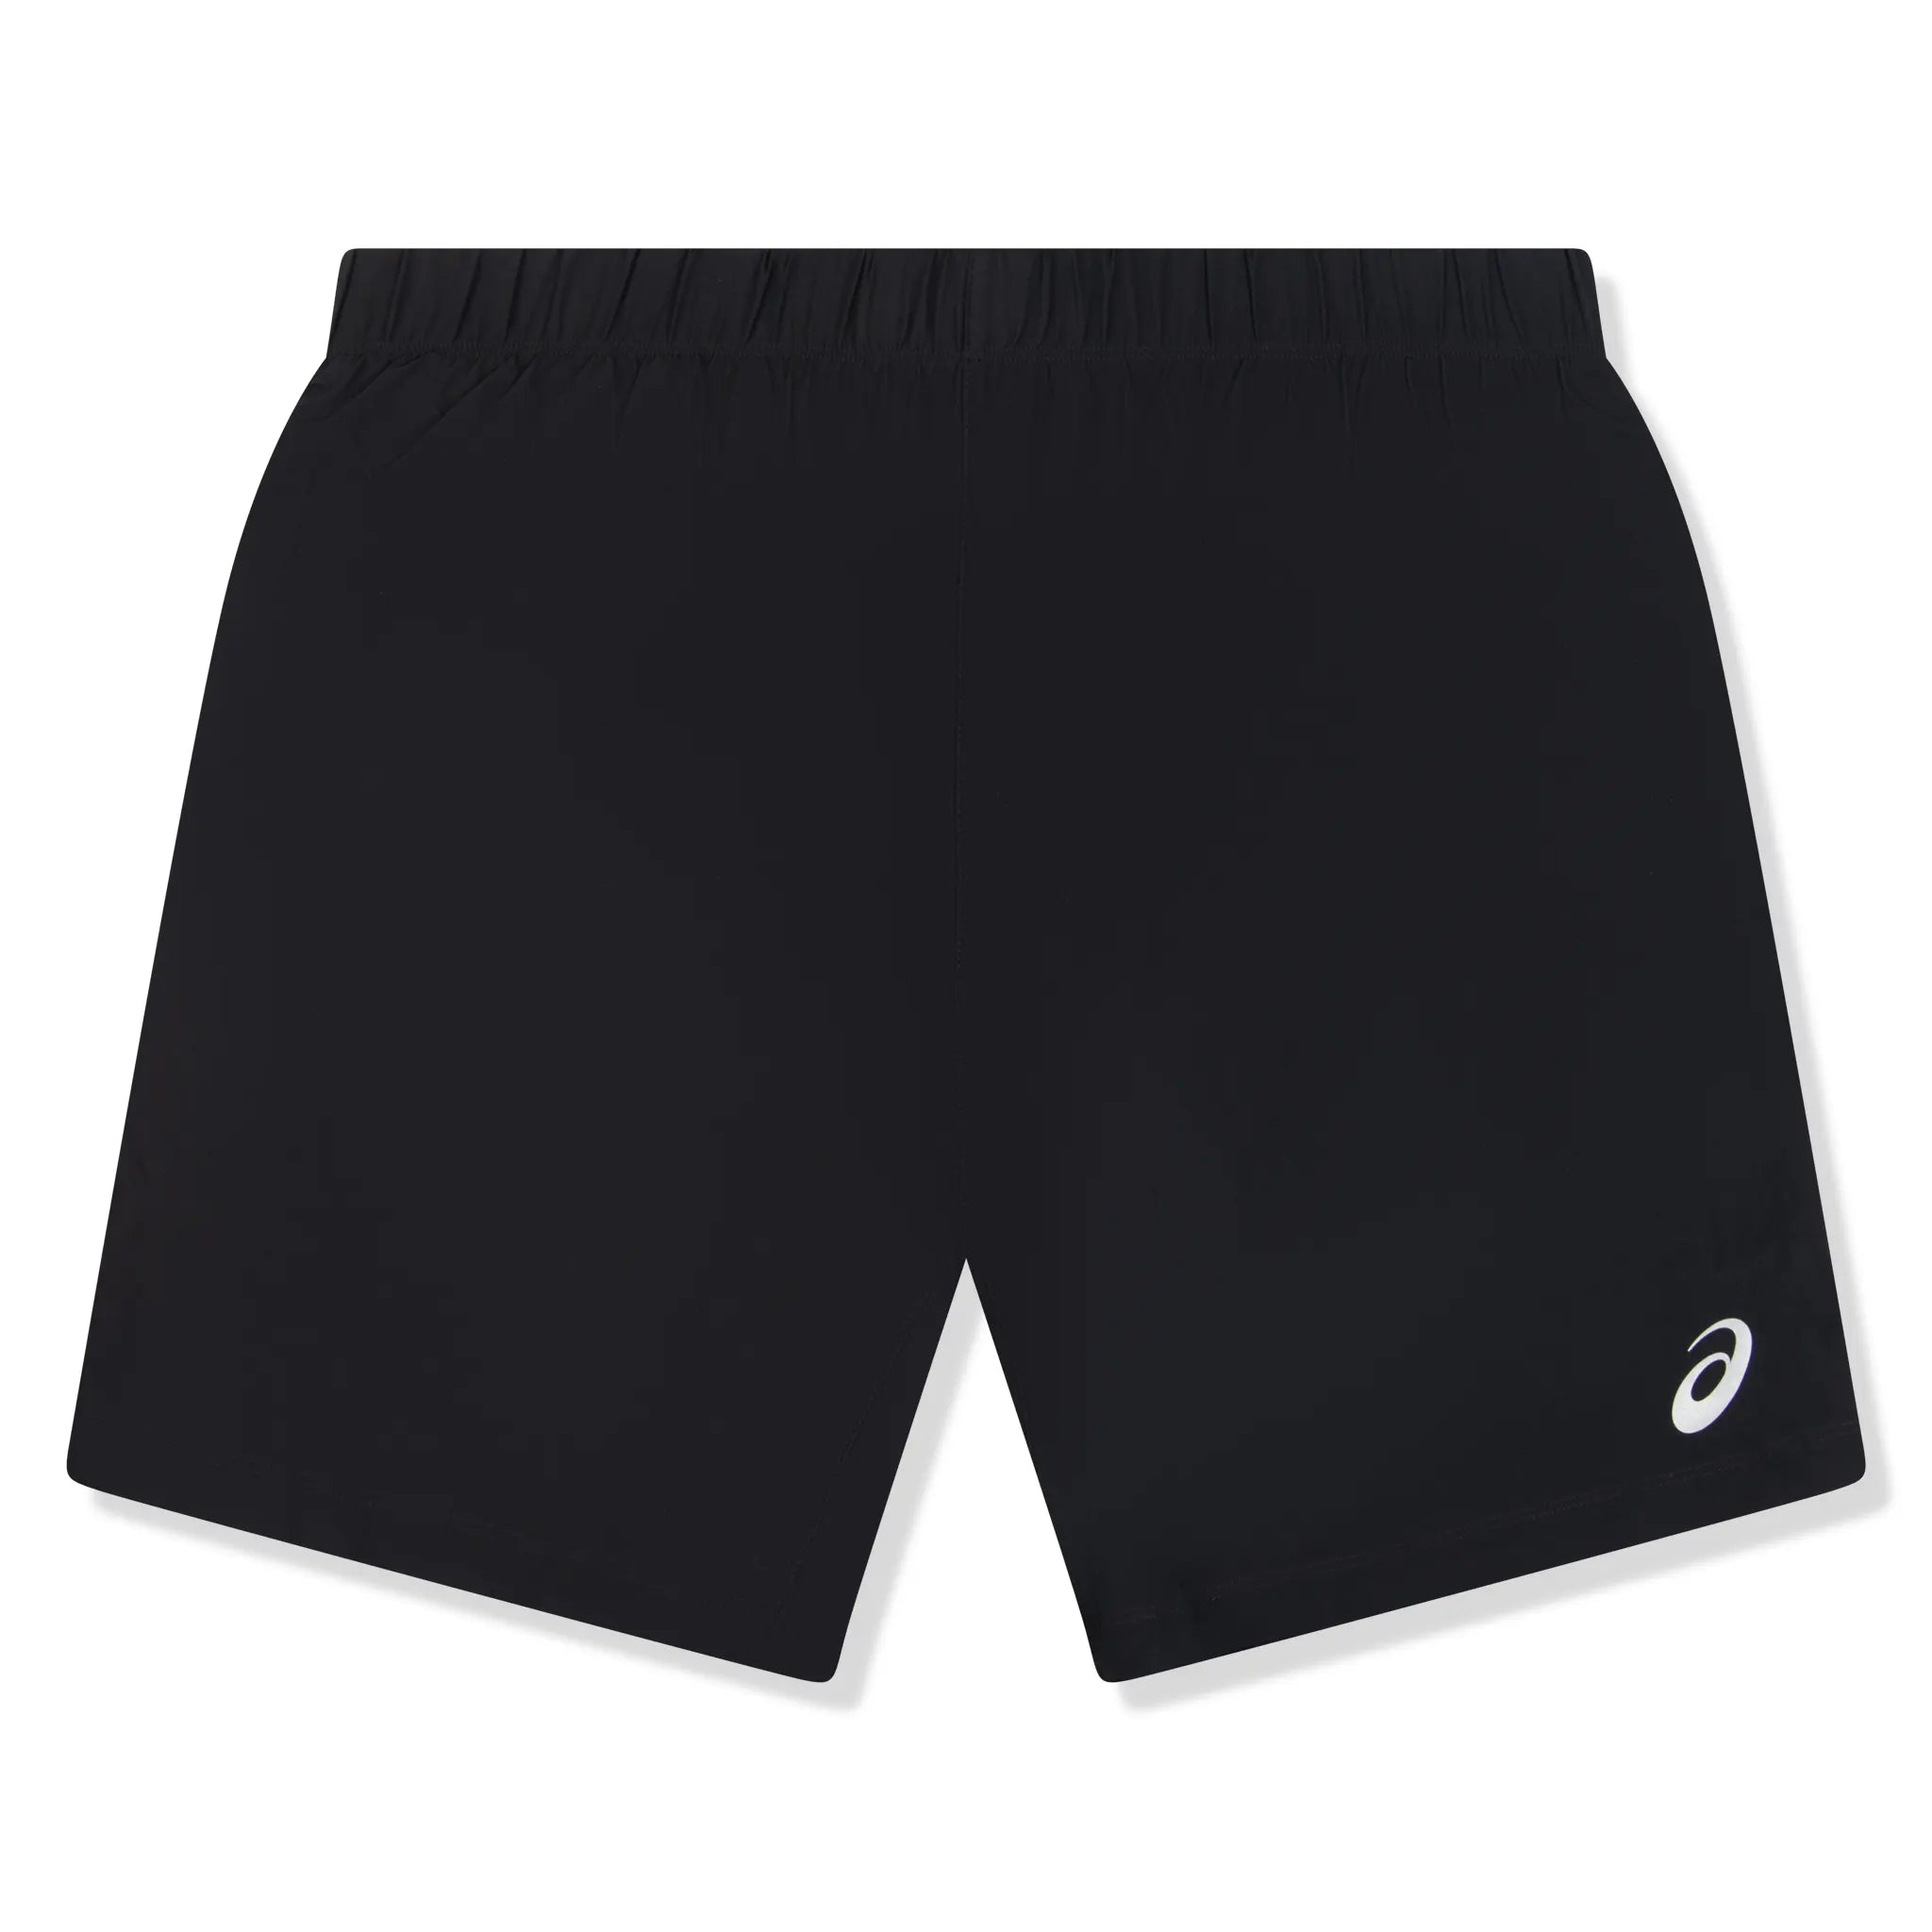 Front view of Asics Sport Woven 2 in 1 Performance Black Running Shorts 164907-0904